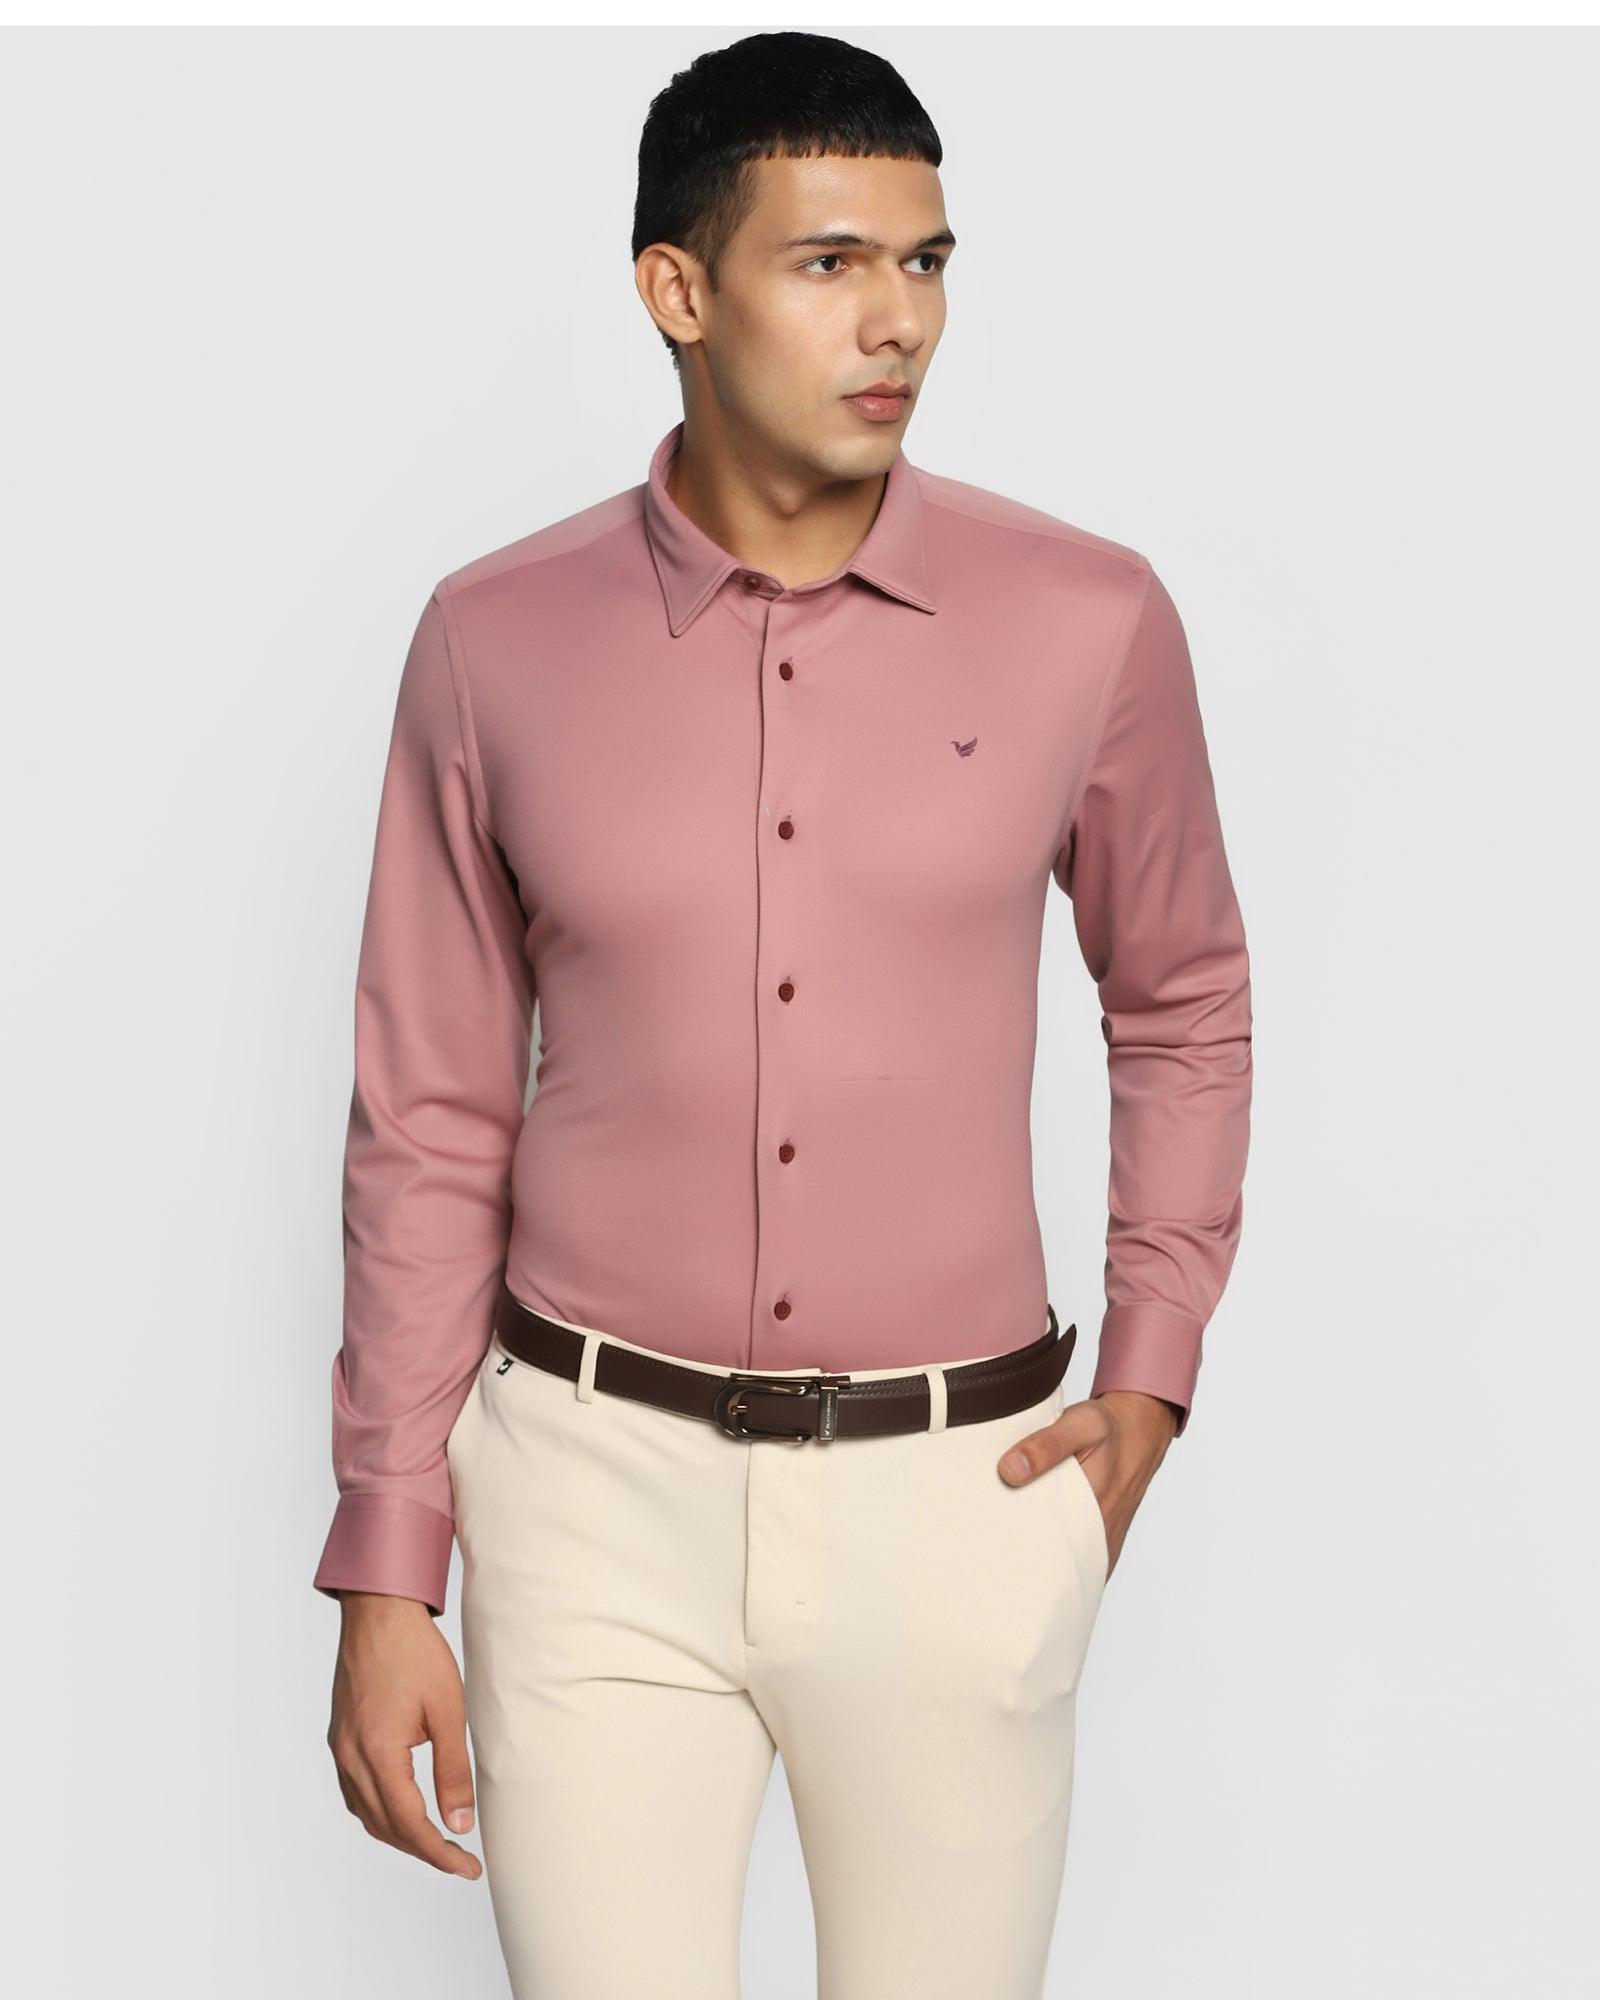 TechPro Formal Pink Solid Shirt - Payback